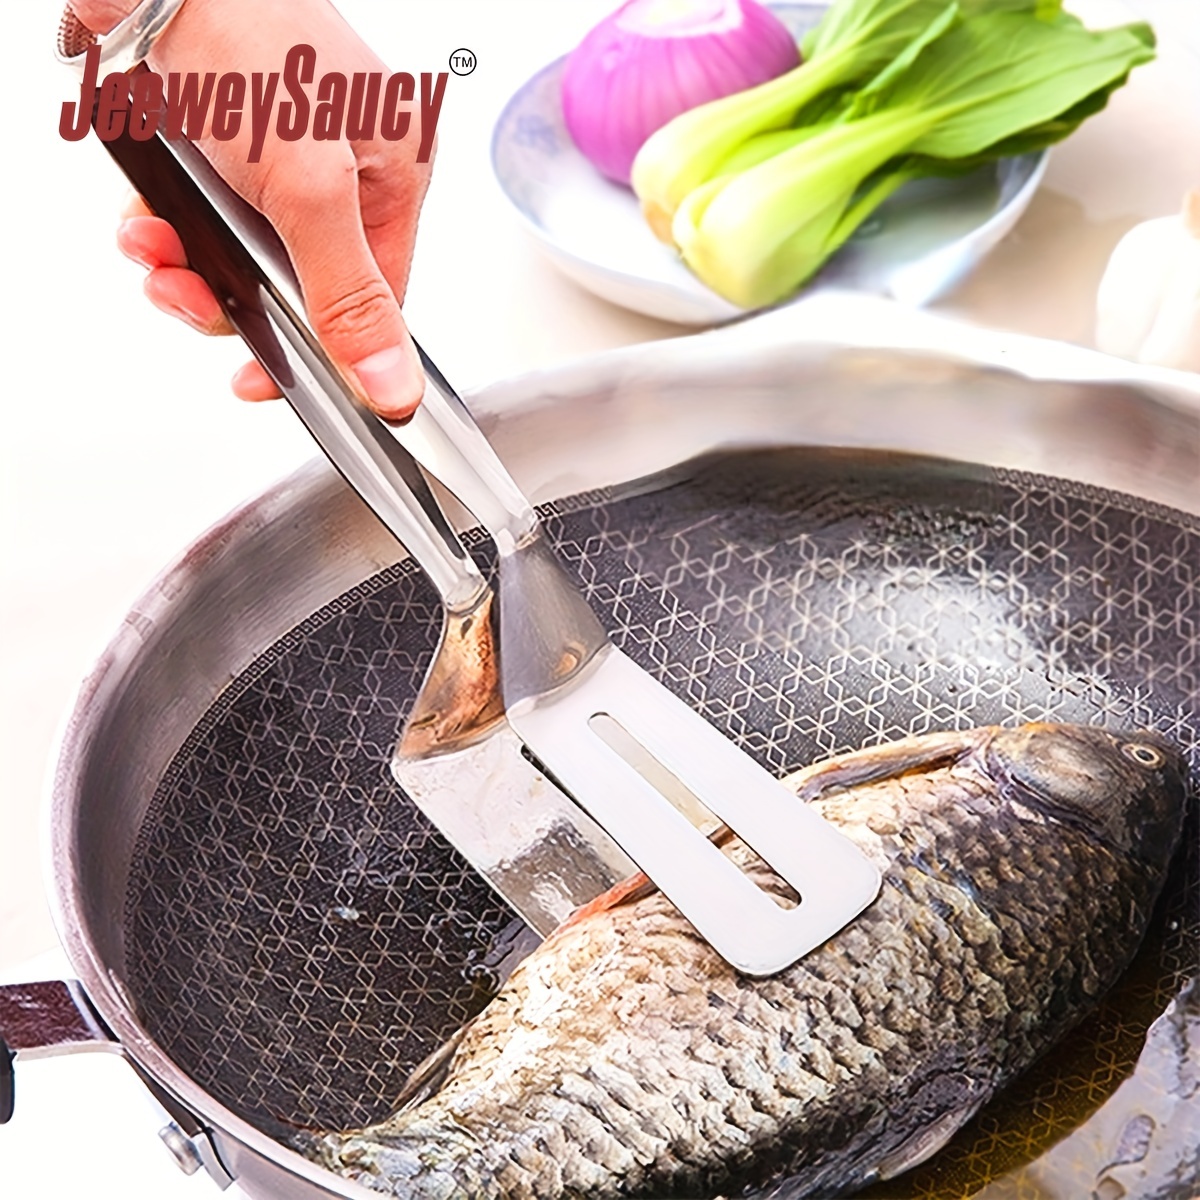 

1pc Durable Frying Fish Shovel With Clamp - Perfect For Steak, Fried Eggs, Pizza, And More - Kitchen Essential